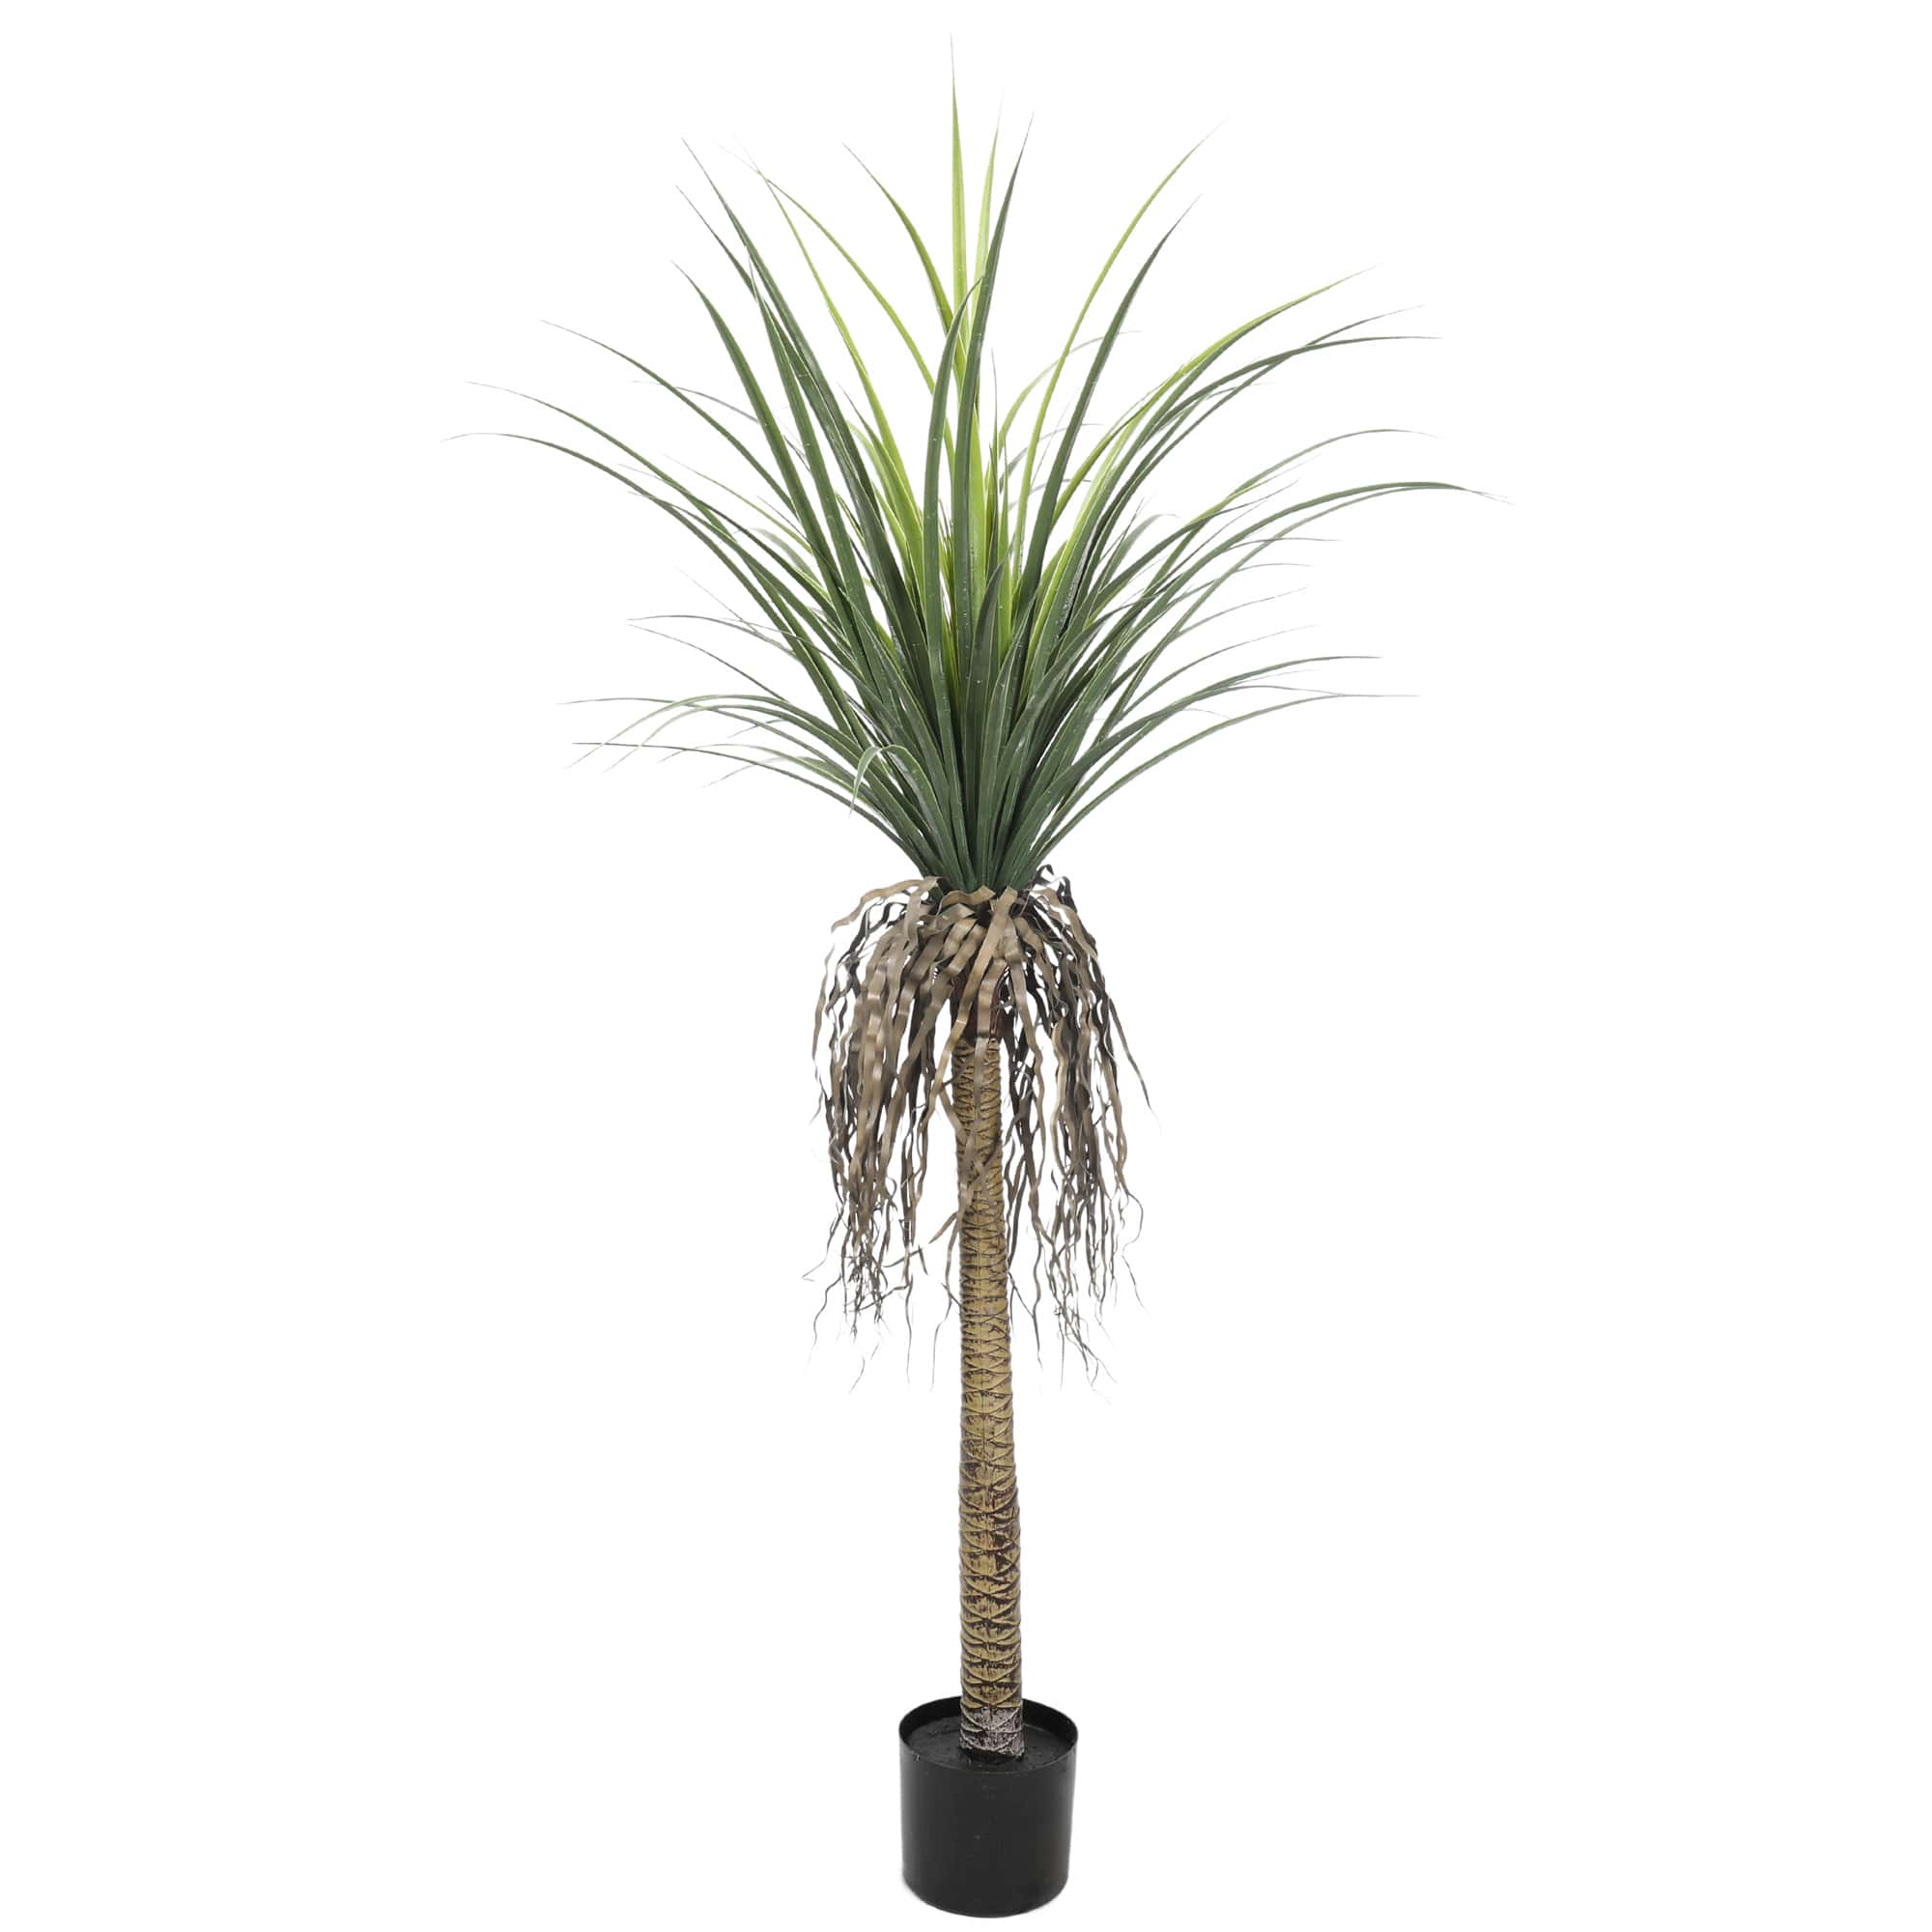 potted-artificial-yucca-tree-with-tall-head-150cm-uv-resistant-backorder-337305.jpg